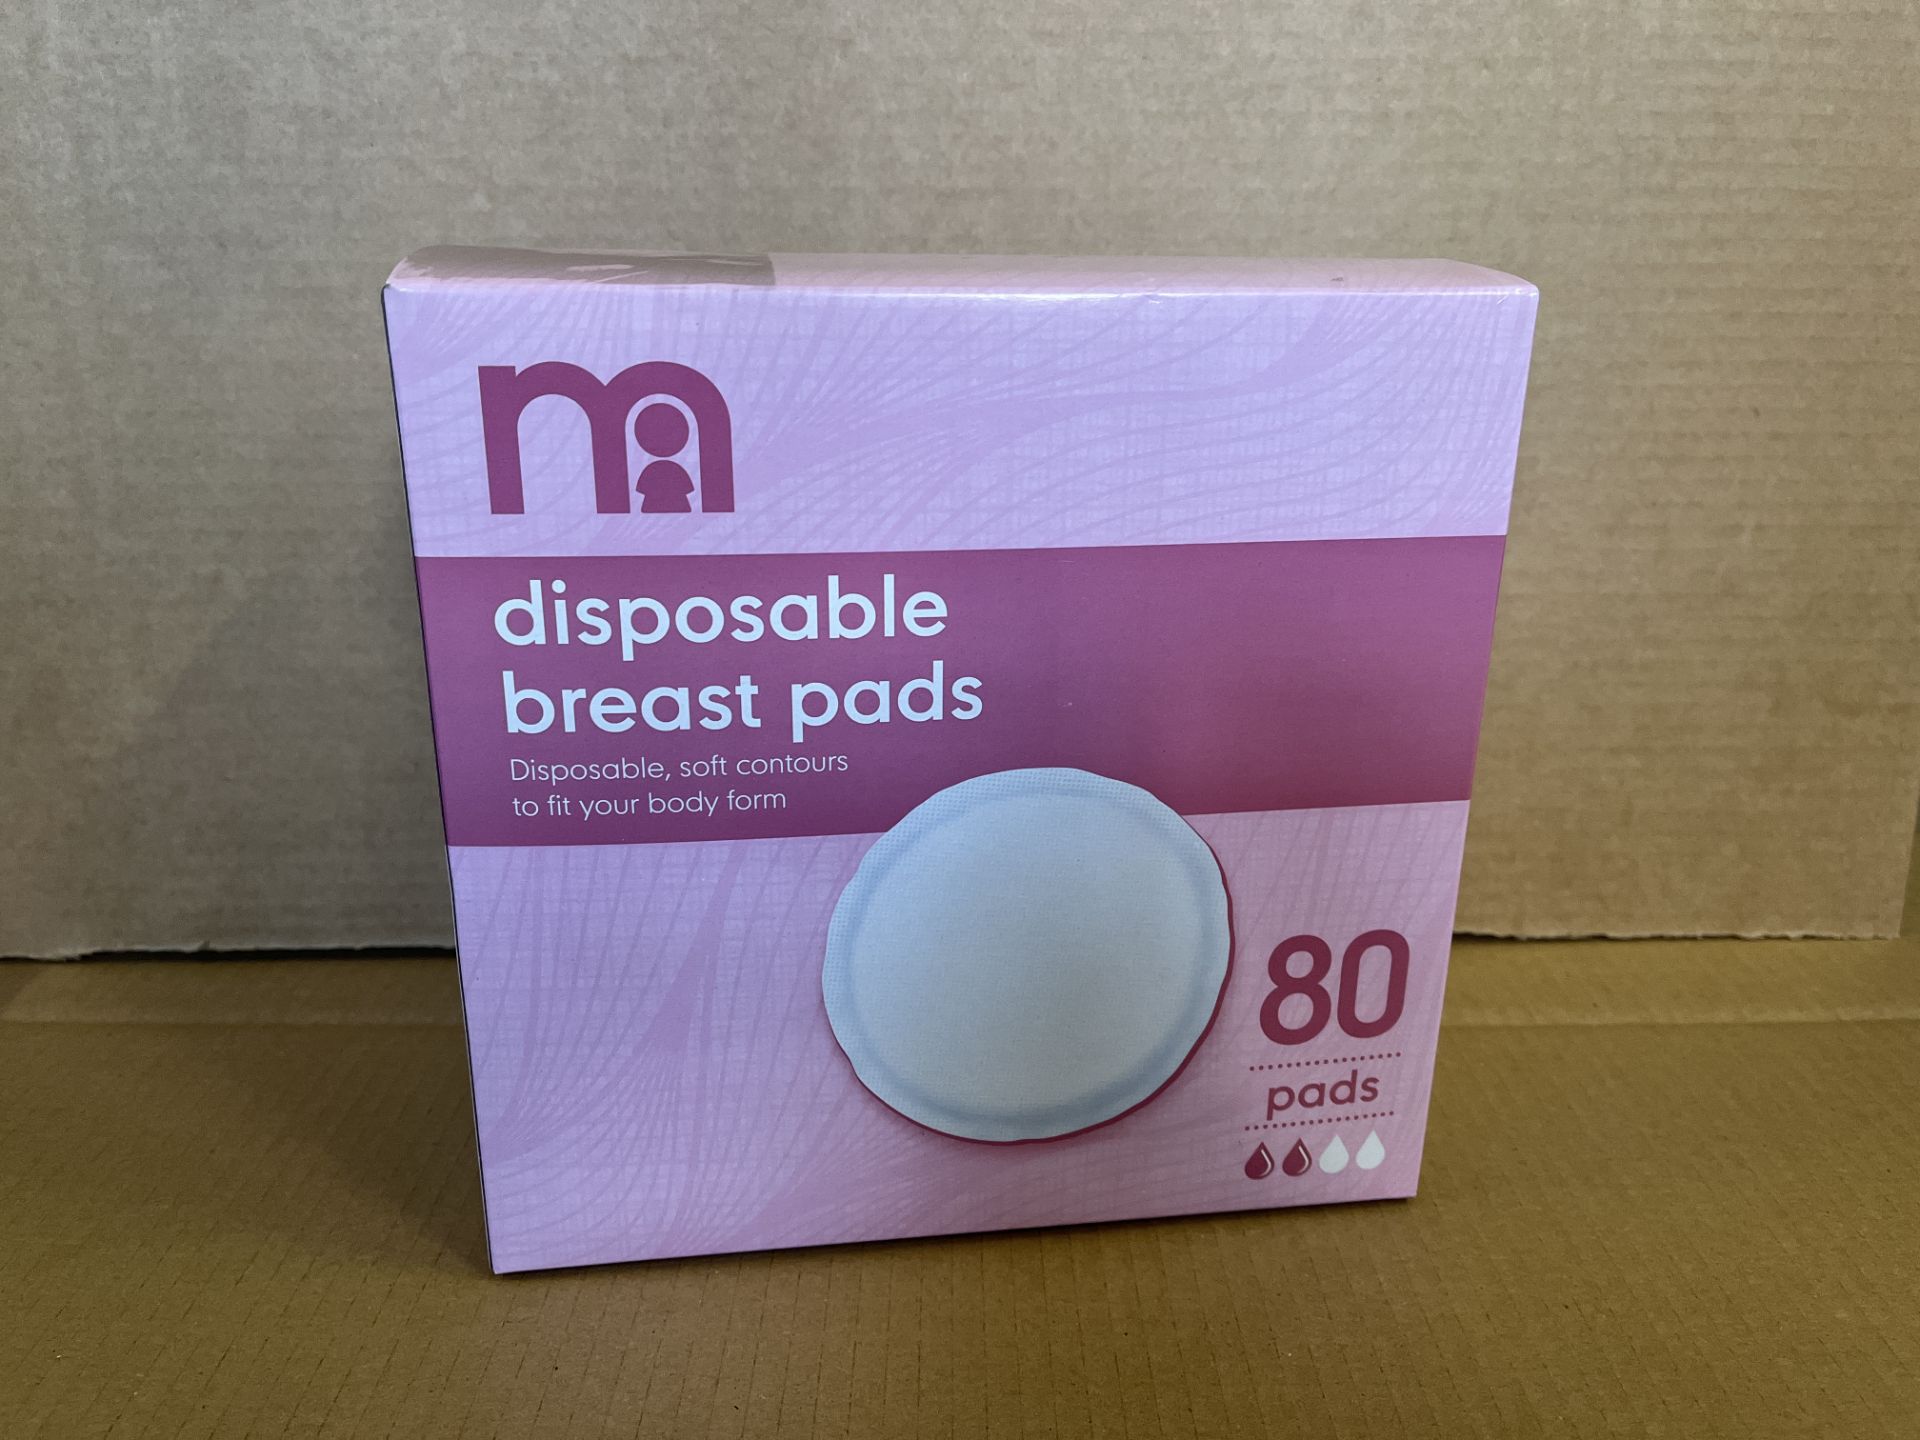 24 X BRAND NEW PACKS OF 80 MOTHERCAR DISPOSABLE BREAST PADS S1P